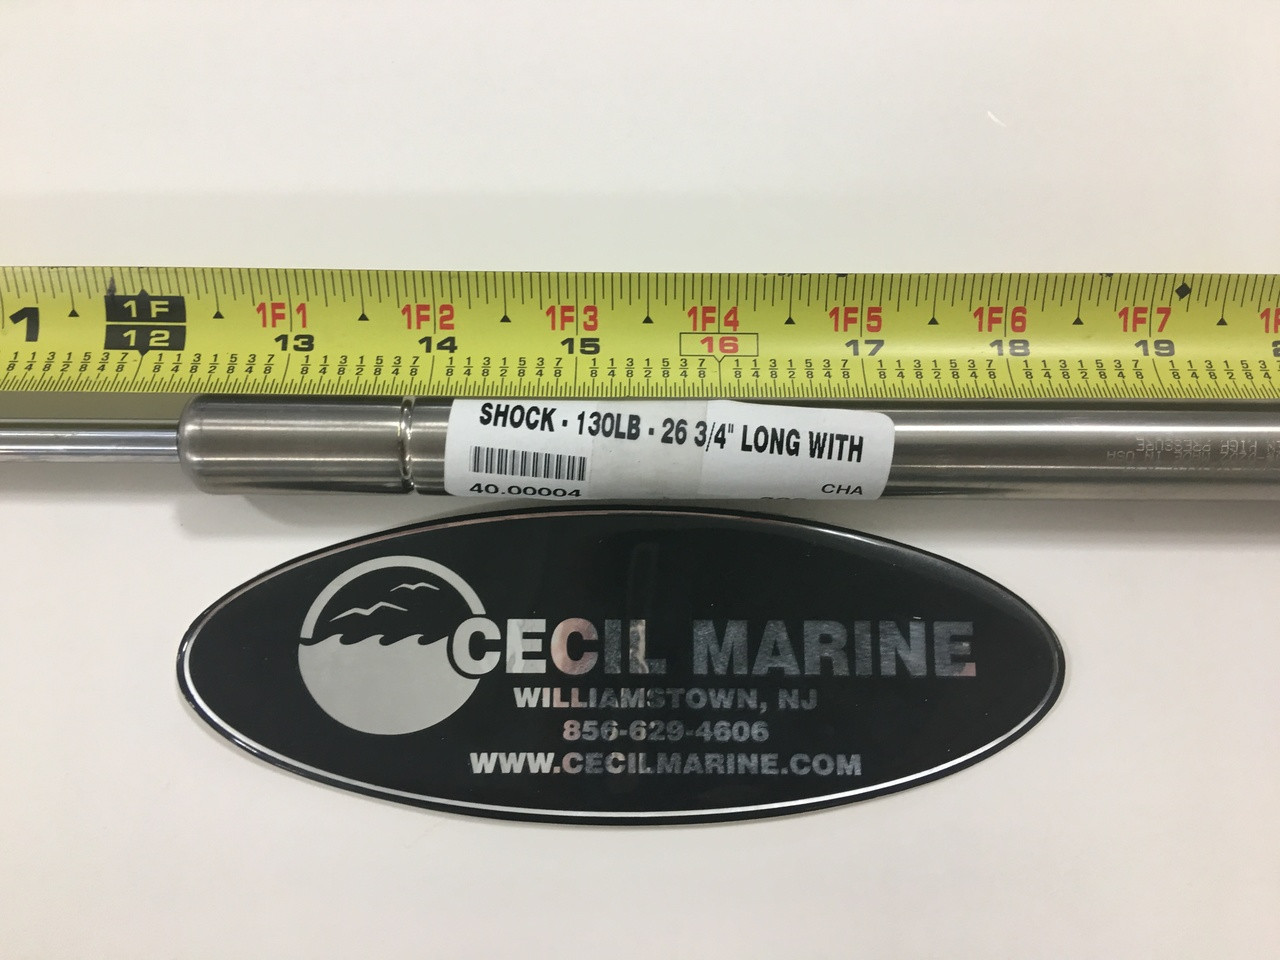 SHOCK - 750-10-130 130LB - 26 3/4" LONG - 10 MM ENDS - 40.00004 *In Stock & Ready To Ship!